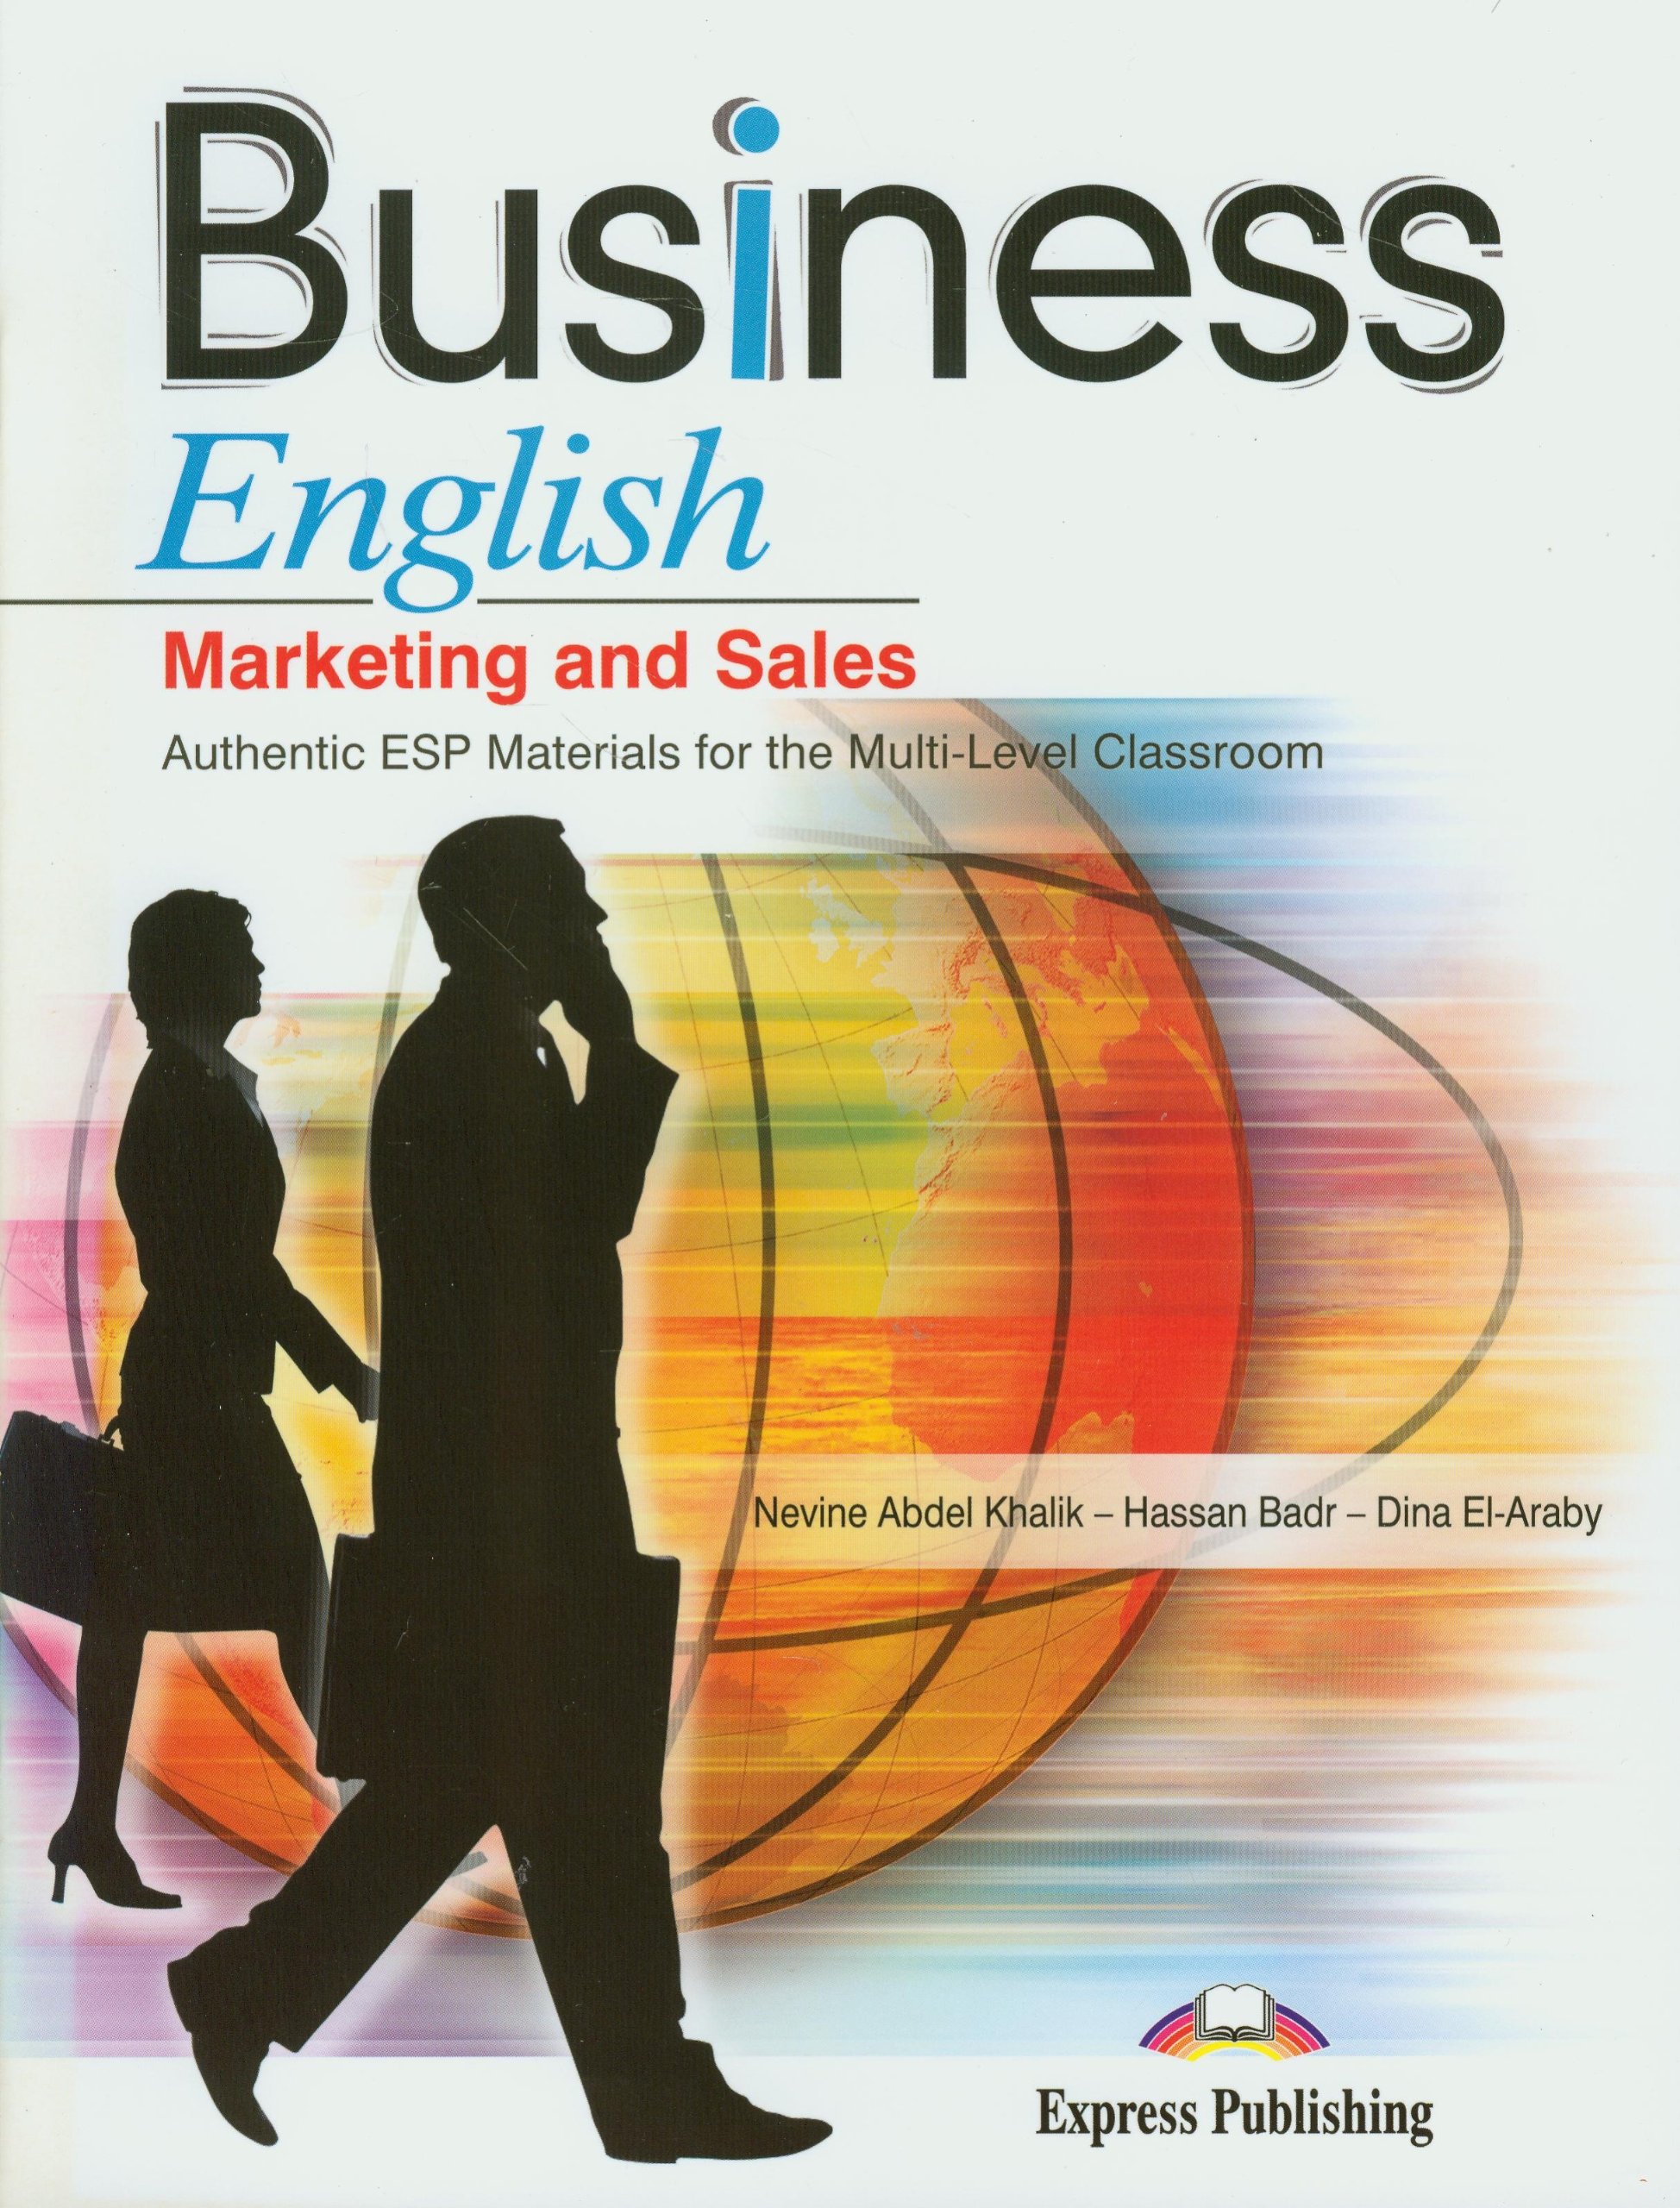 BUSINESS ENGLISH MARKETING AND SALES (CAREER PATHS) Student's Book